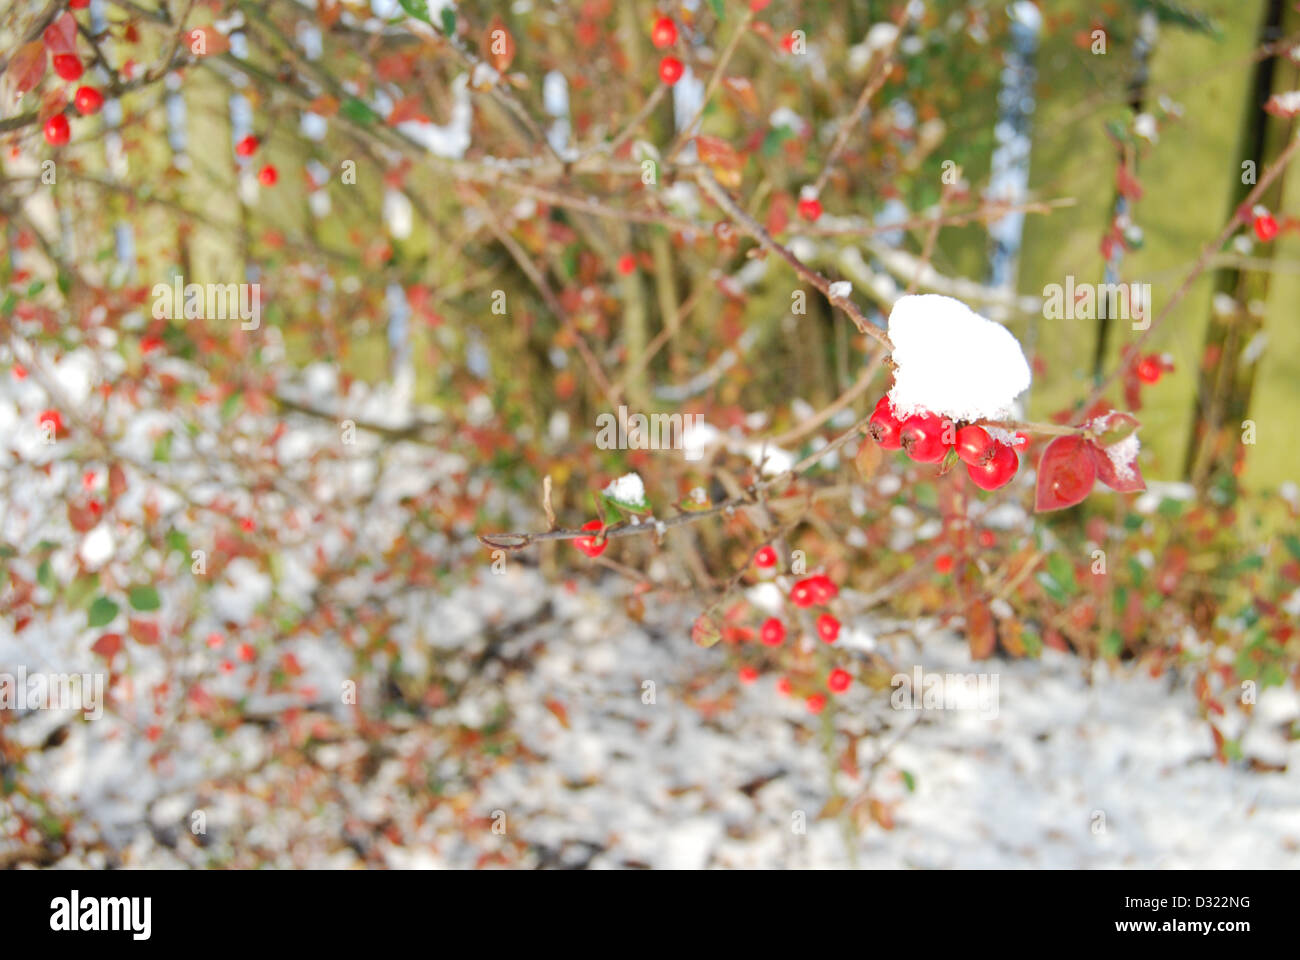 A red berry bush with a lump of snow on the ripe berry for birds to eat in the cold winter planted against a fence in a garden Stock Photo